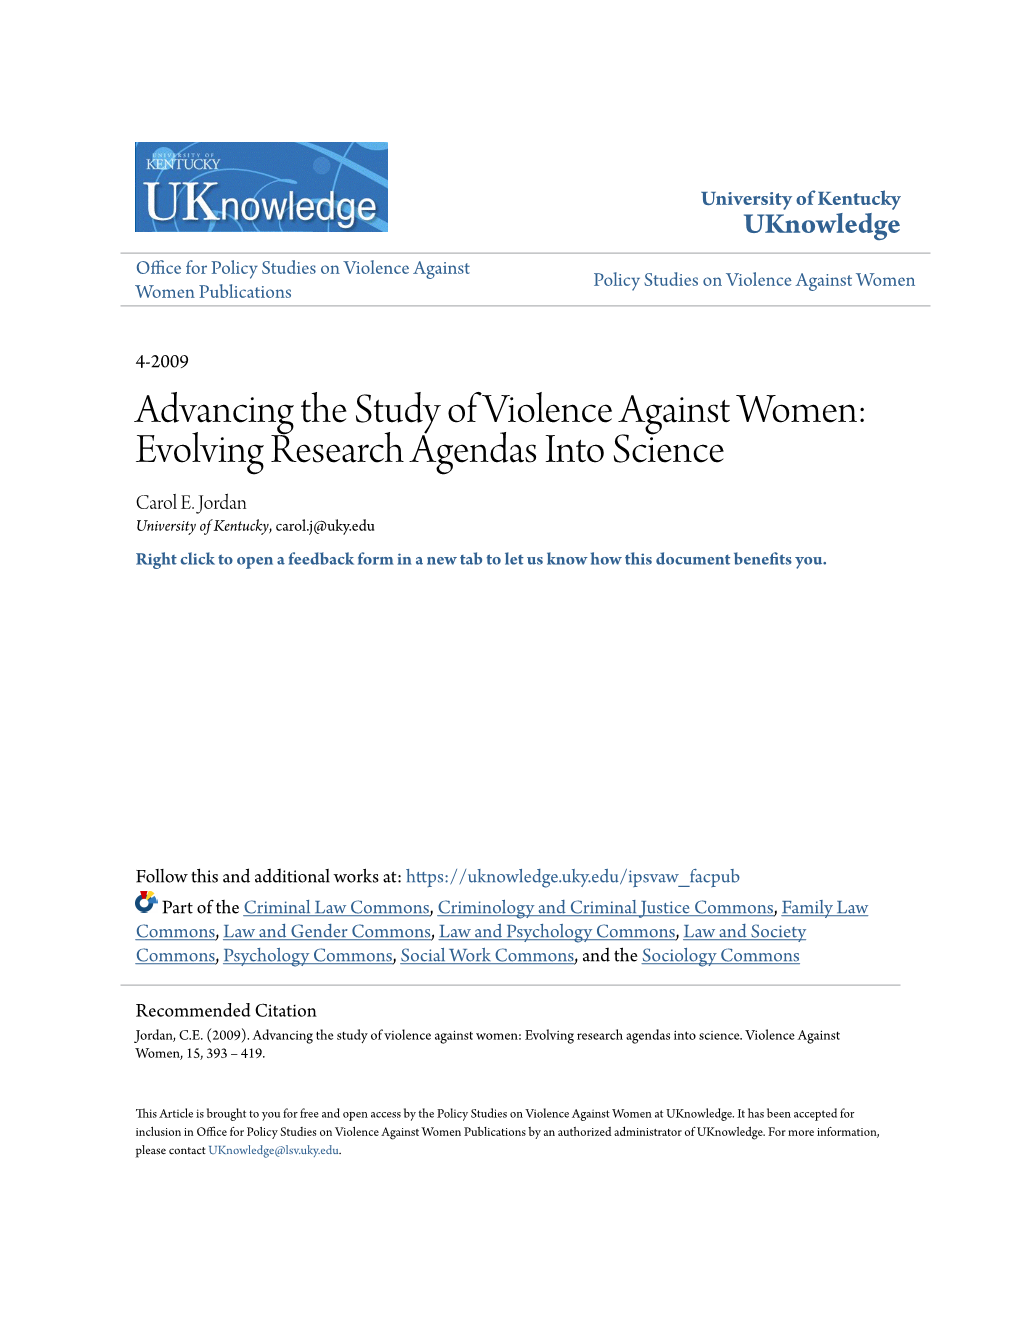 Advancing the Study of Violence Against Women: Evolving Research Agendas Into Science Carol E